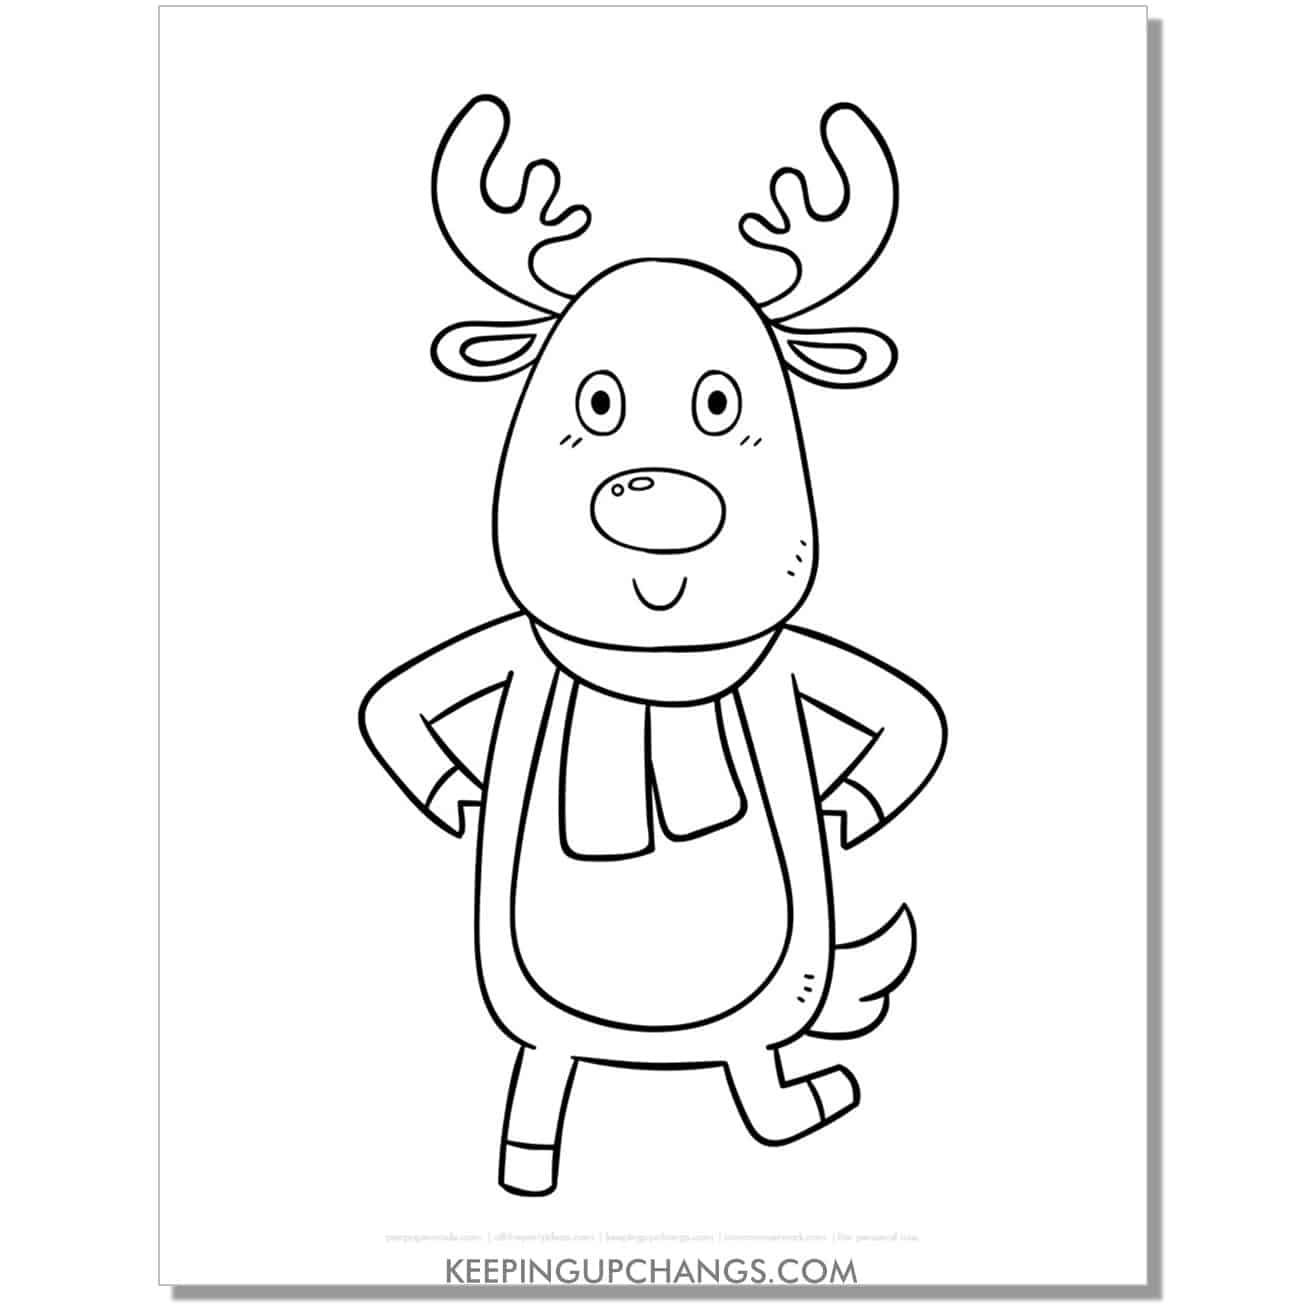 free funny reindeer dancing with hands on hips coloring page.